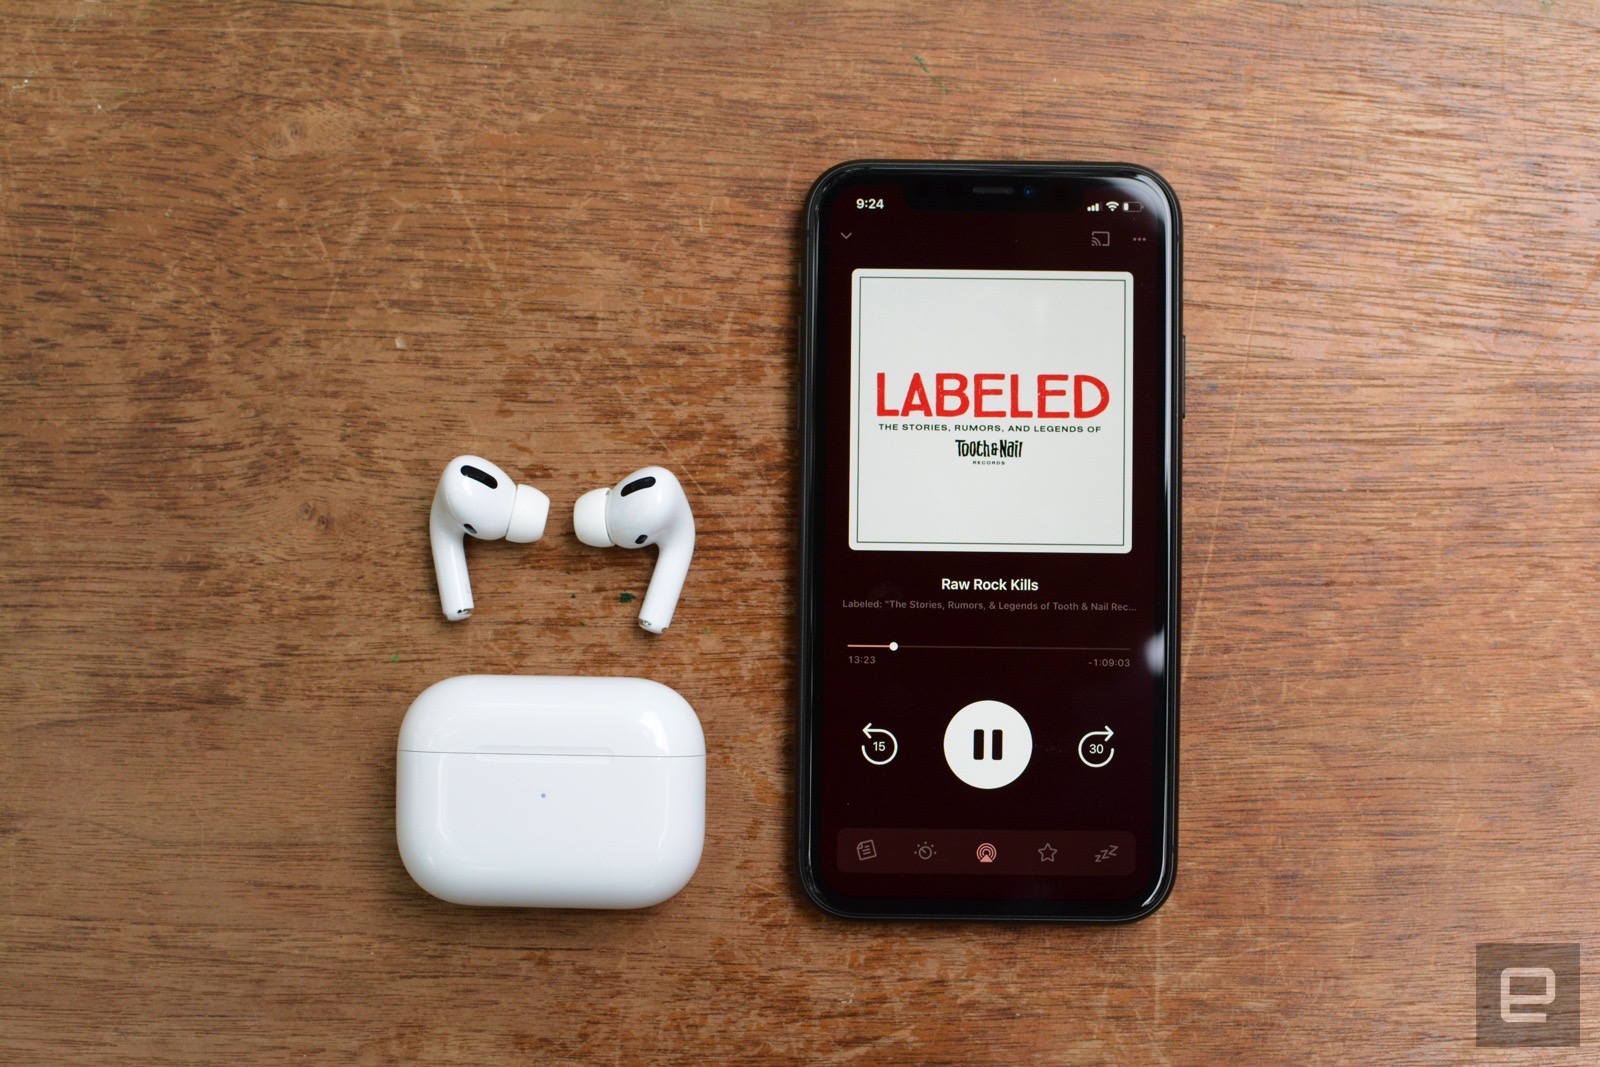 Apple Airpods Pro Now Offer Spatial Audio Wilson S Media - 70 roblox music codes working id 2020 2021 p 16 mp3 free